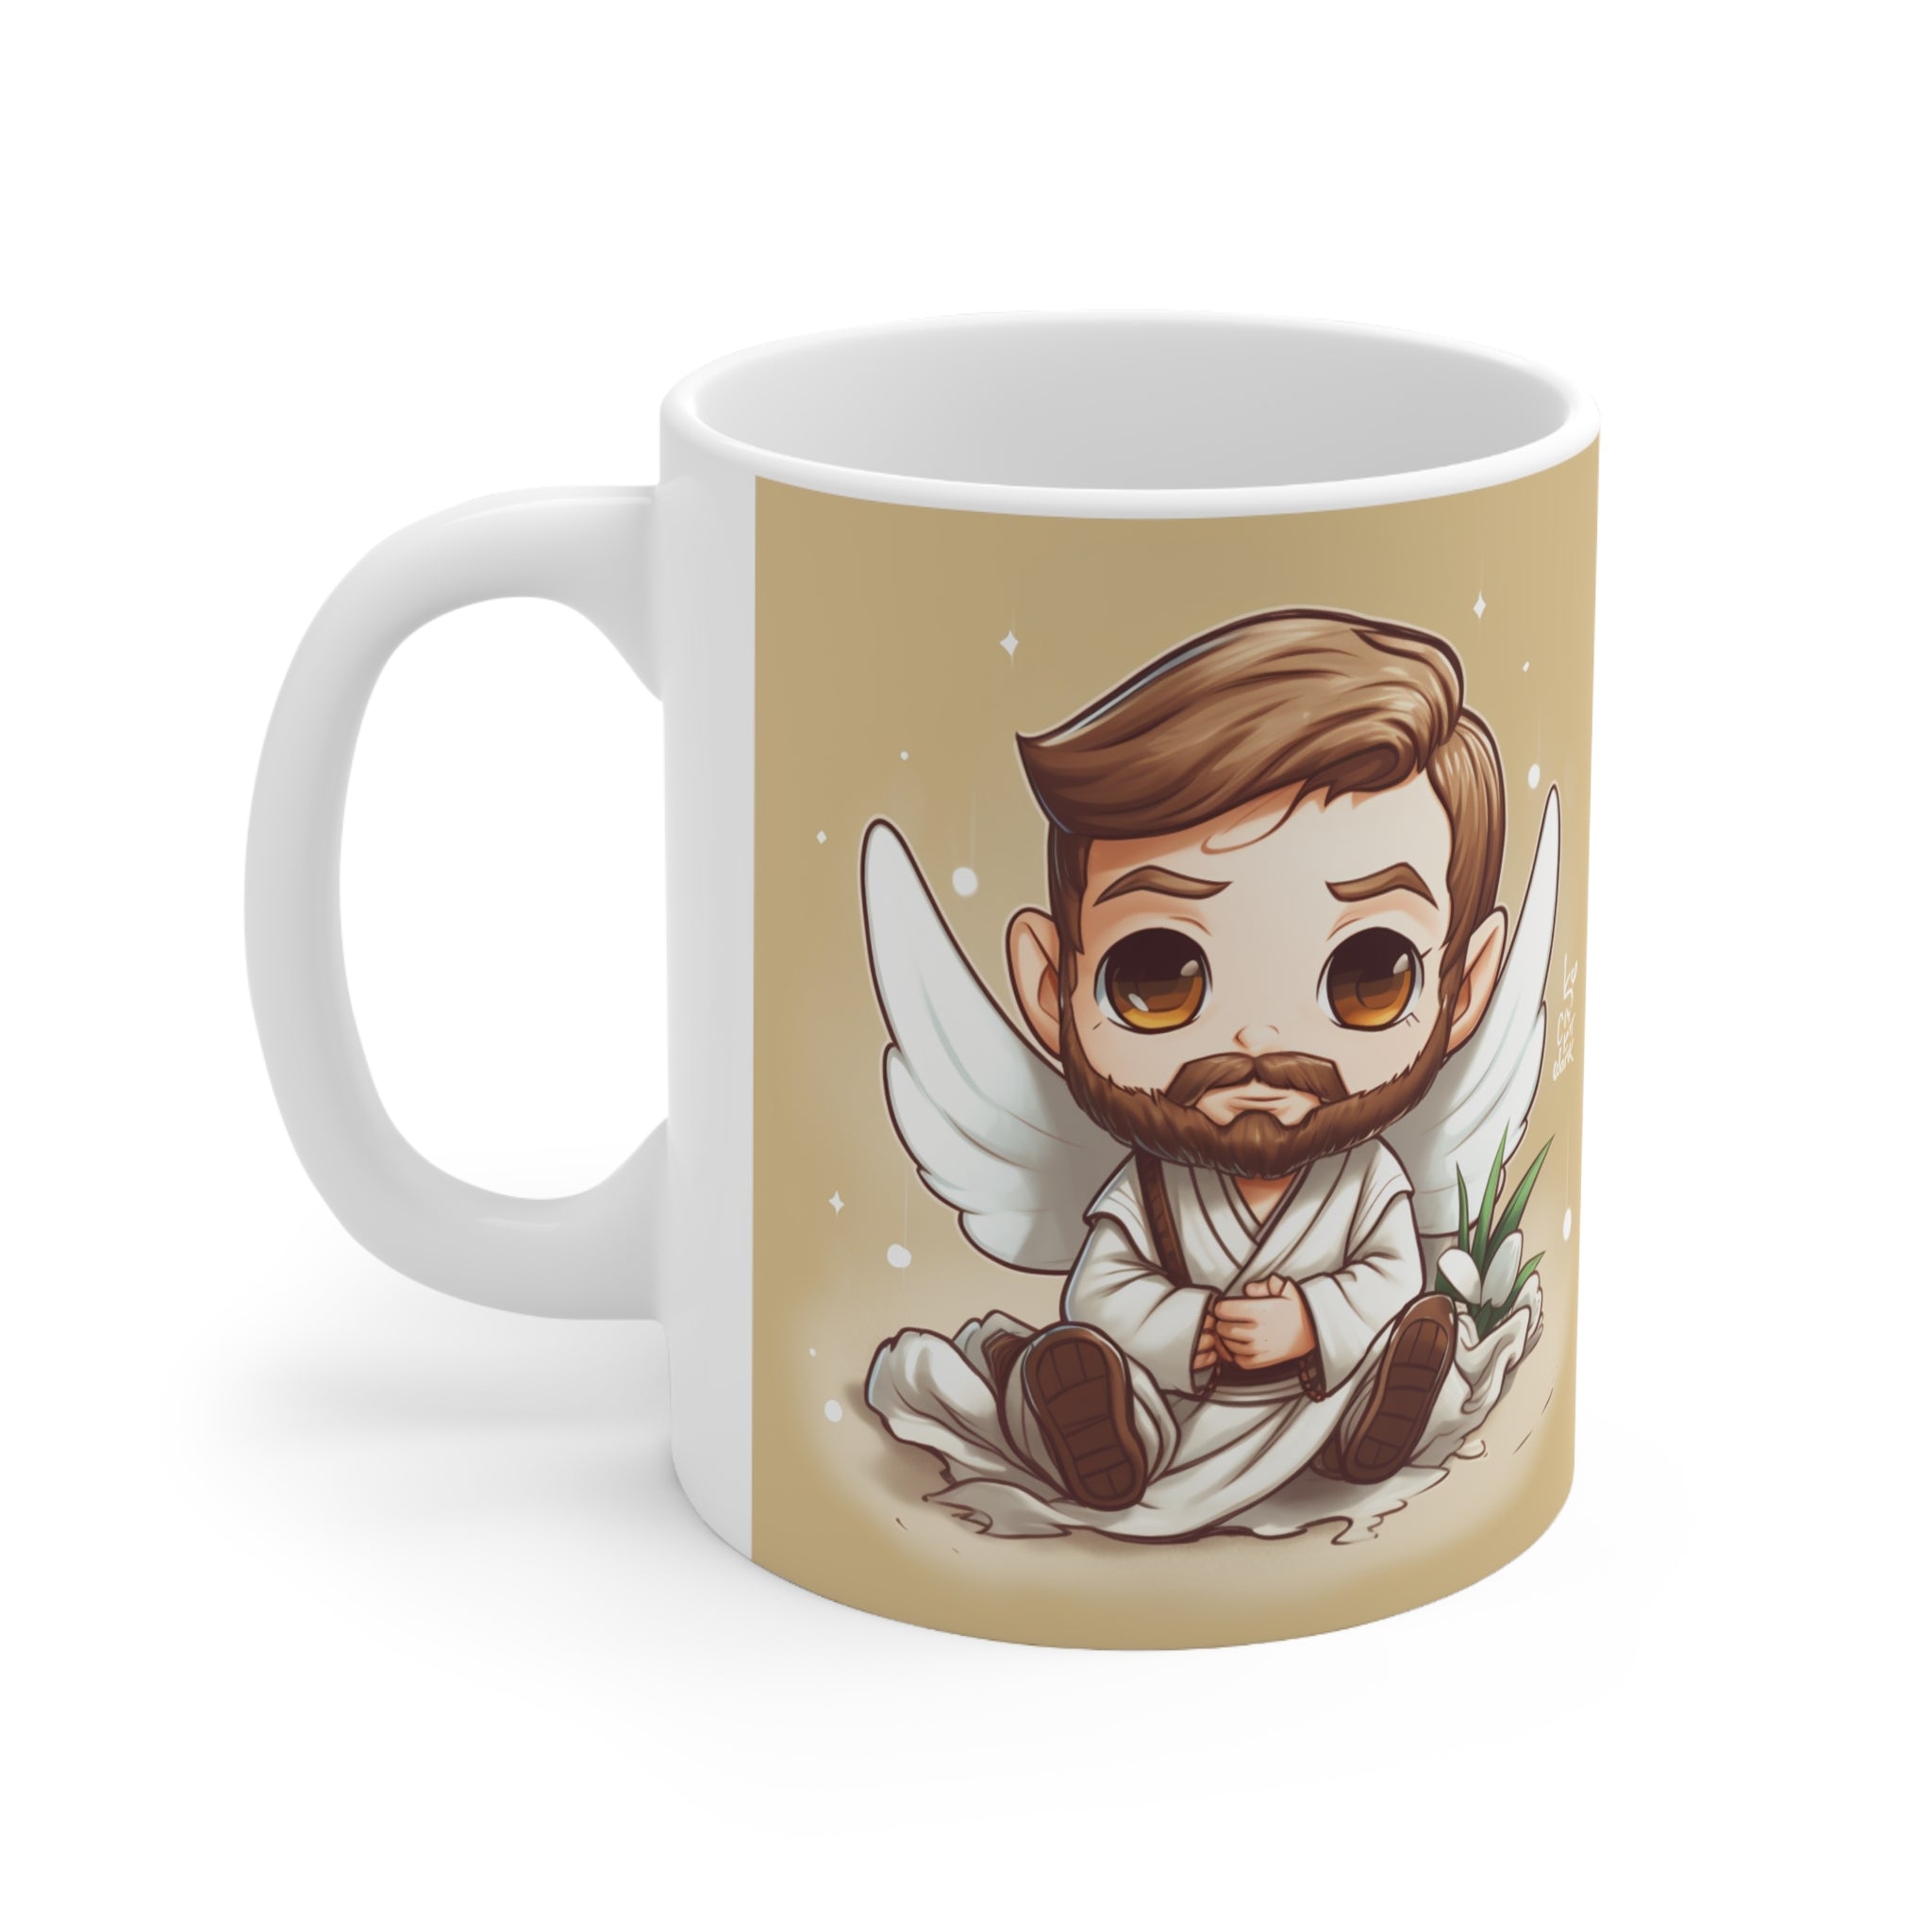 Classic Galaxy Hero Romantic Valentine's Day Cupid Ceramic Mug 11oz - Unique Gift for the One You Love or for the Ideal Gift for Friends